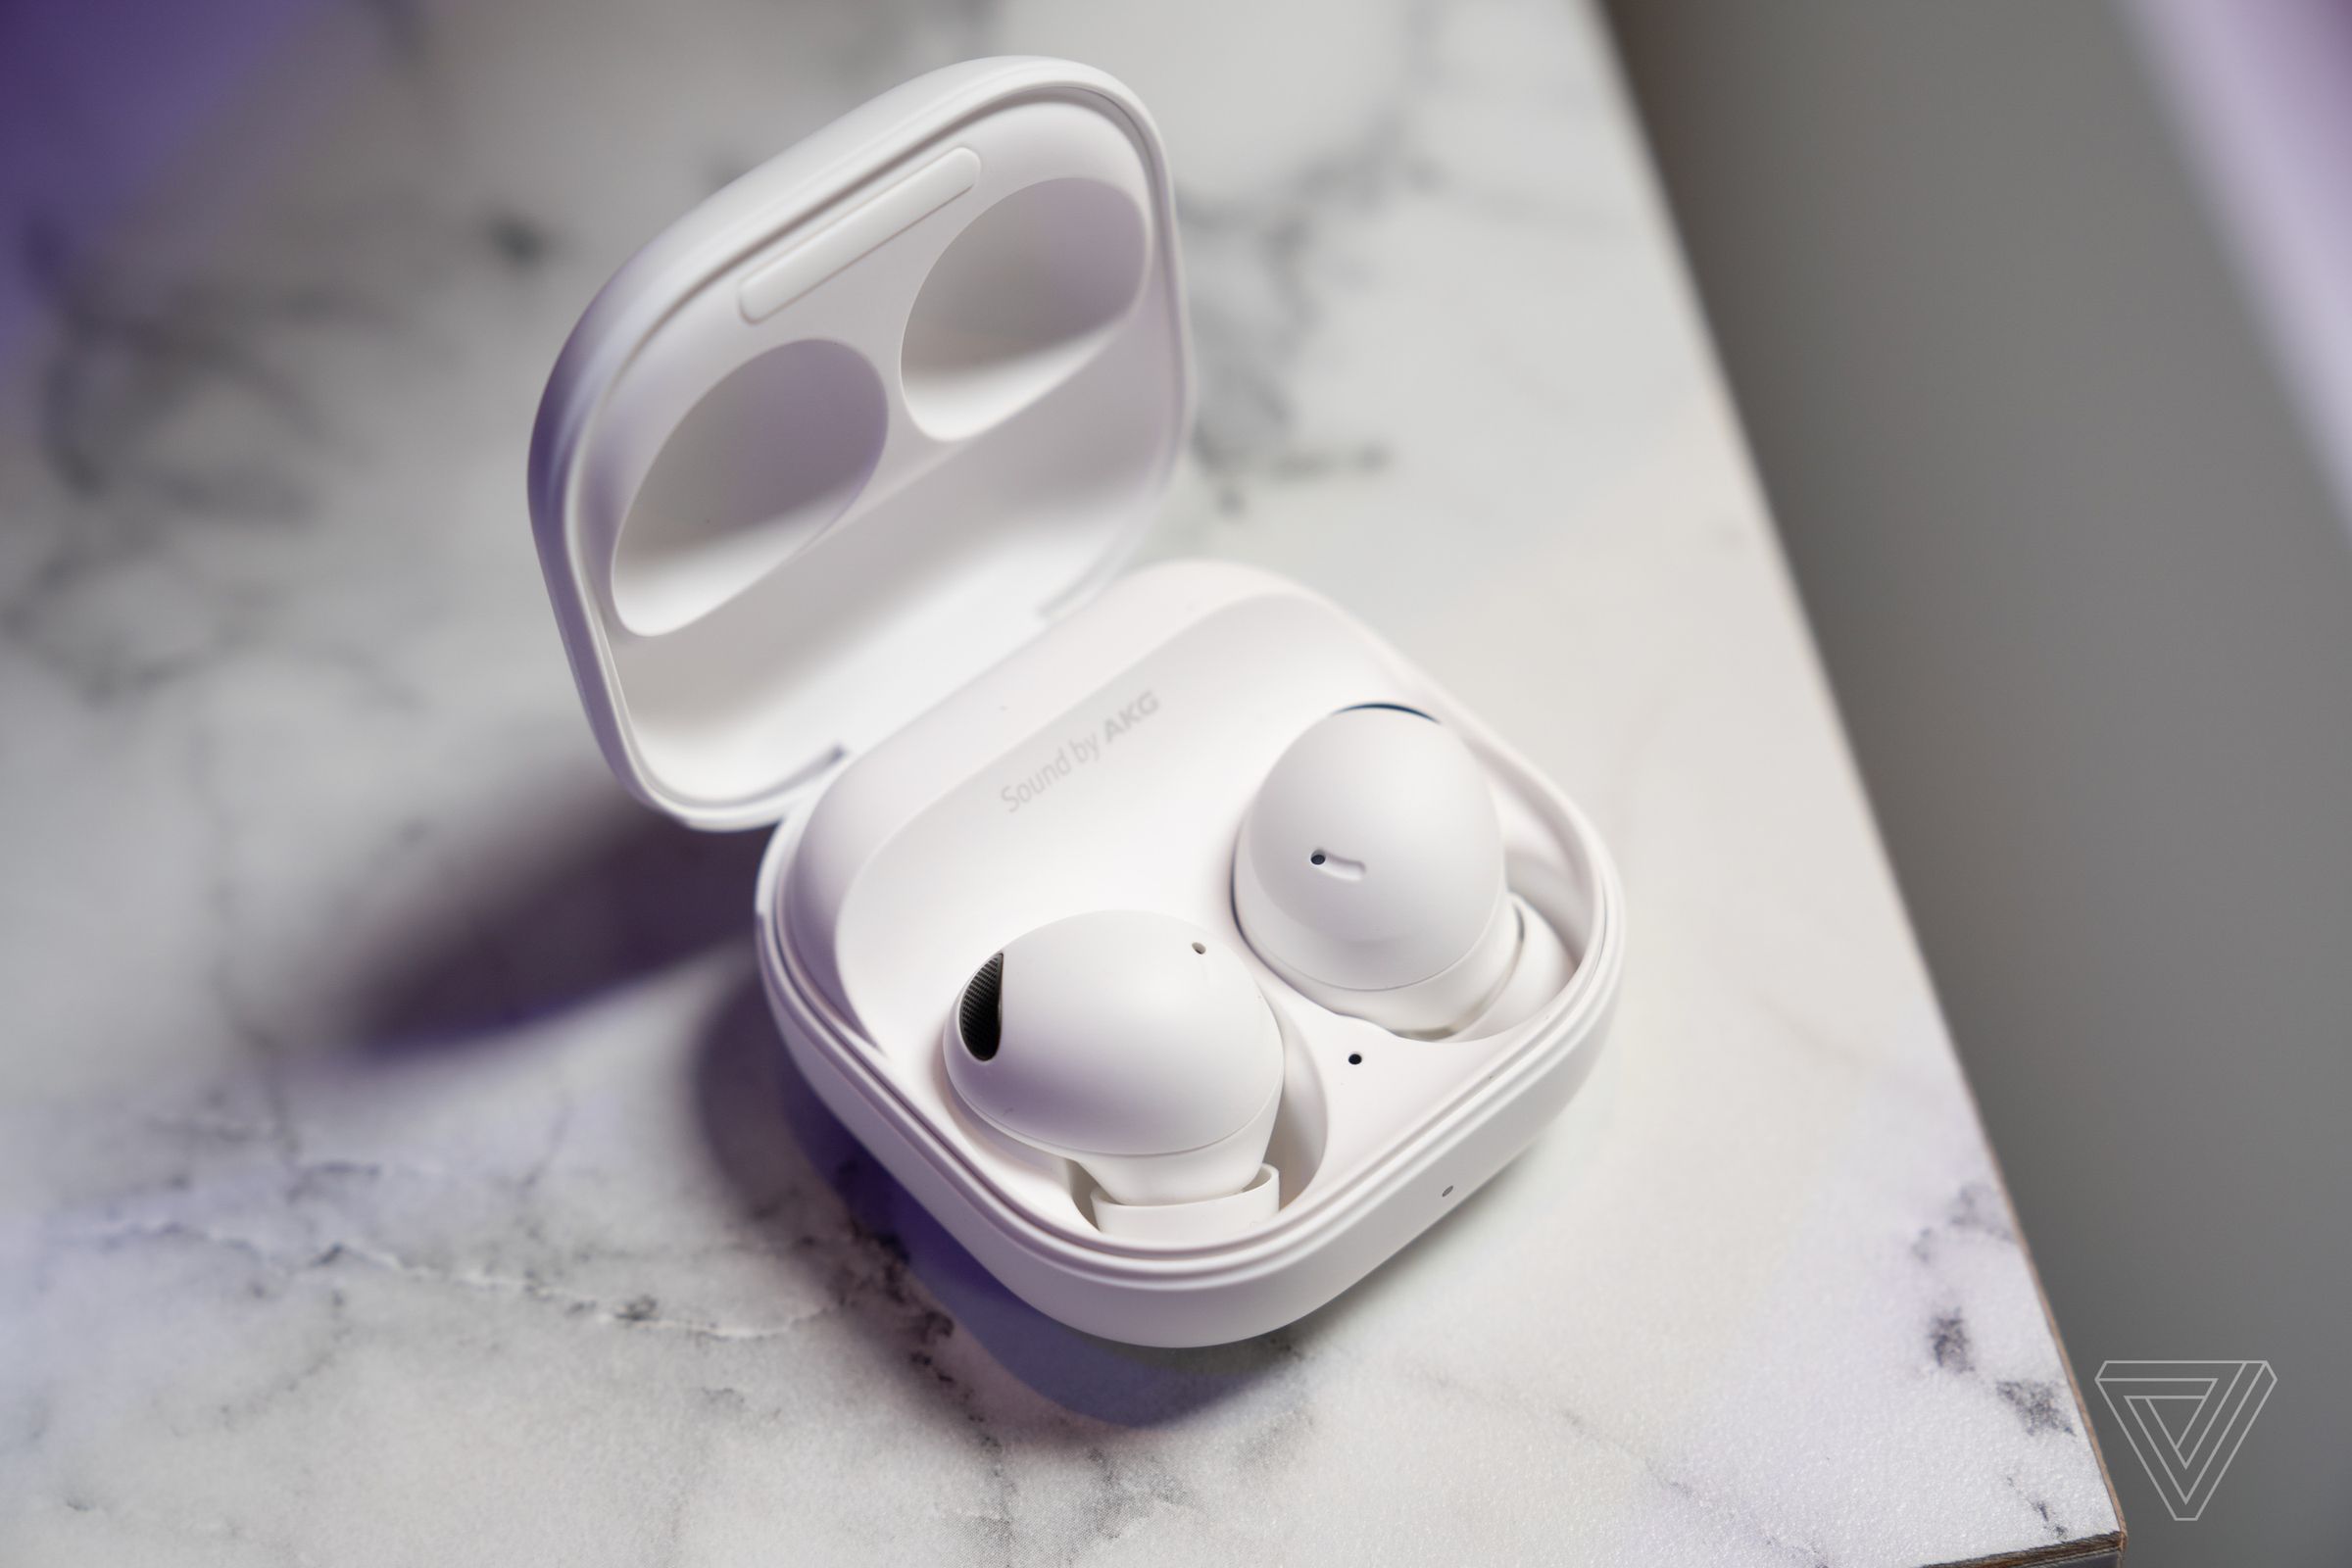 The new Galaxy Buds 2 Pro are capable of 24-bit audio playback.